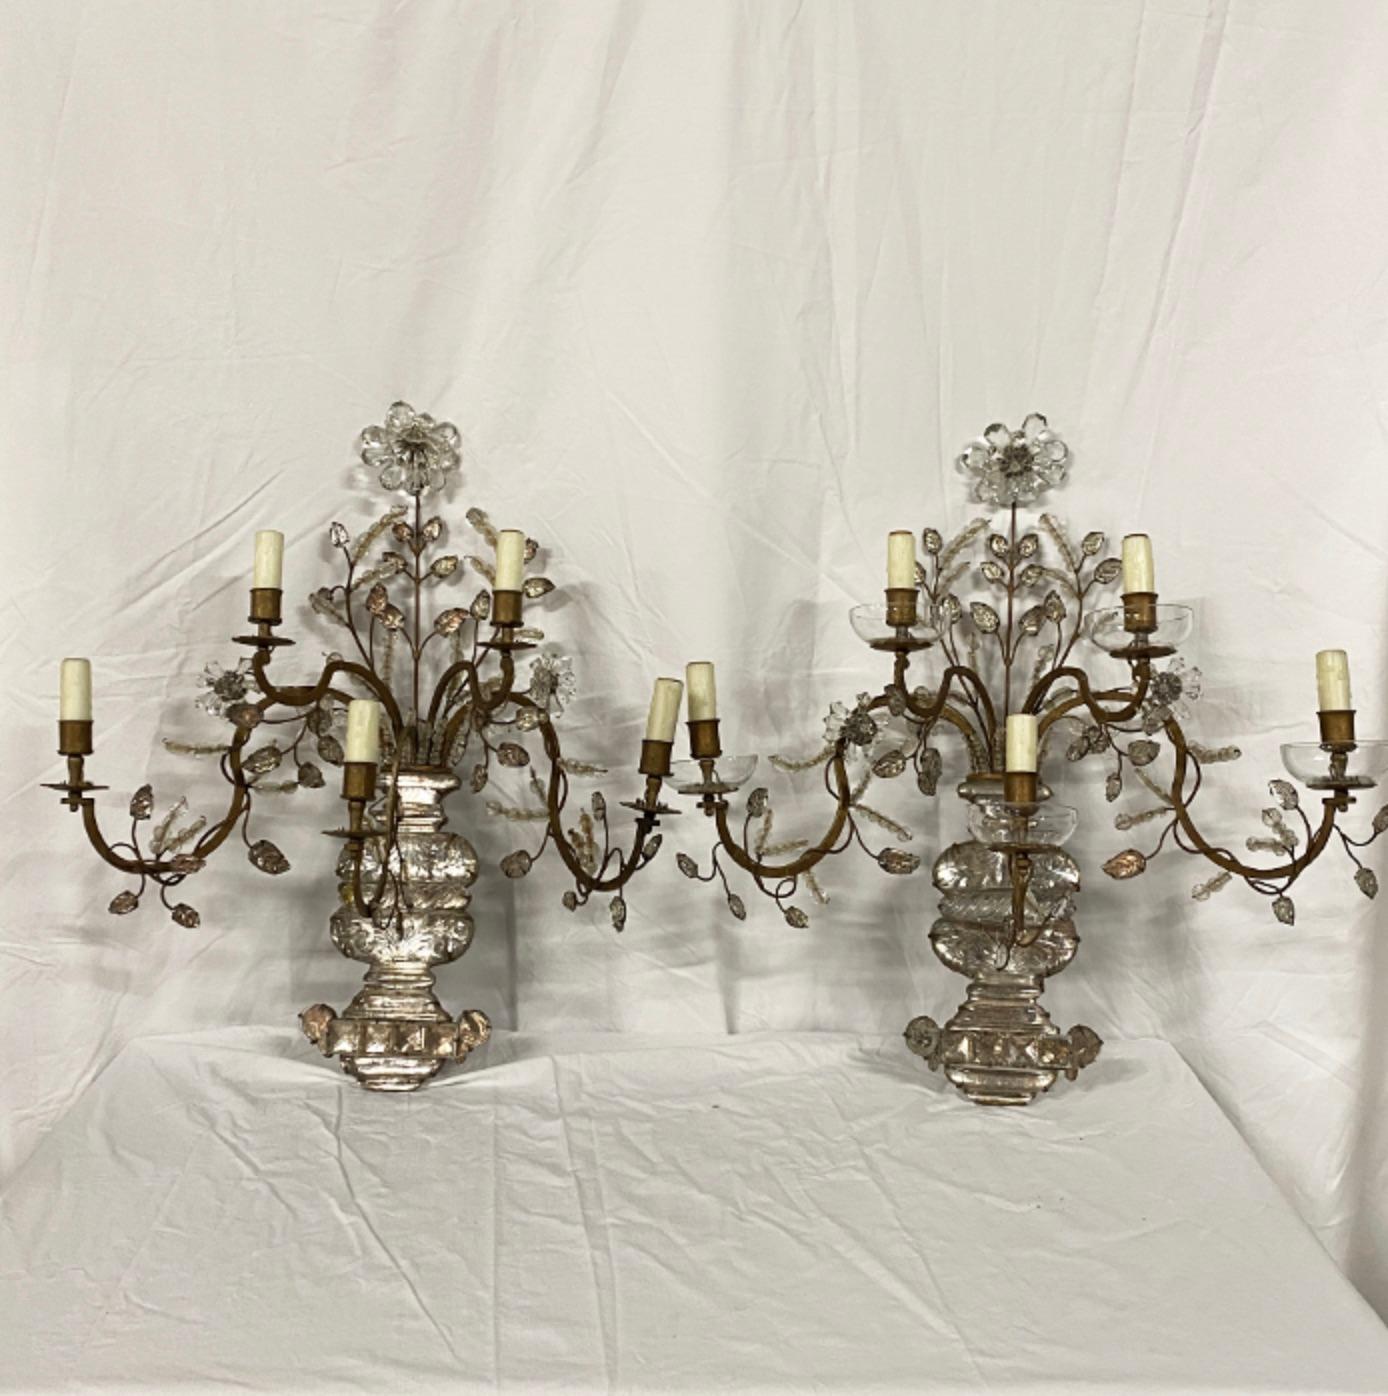 PAIR OF FRENCH MAISON BAGUES GILT METAL SCONCES

Pair of French Maison Bagues Gilt Metal and glass five light Wall Sconces with a spray of leaves and flowers emanating from a vase France, circa 1960